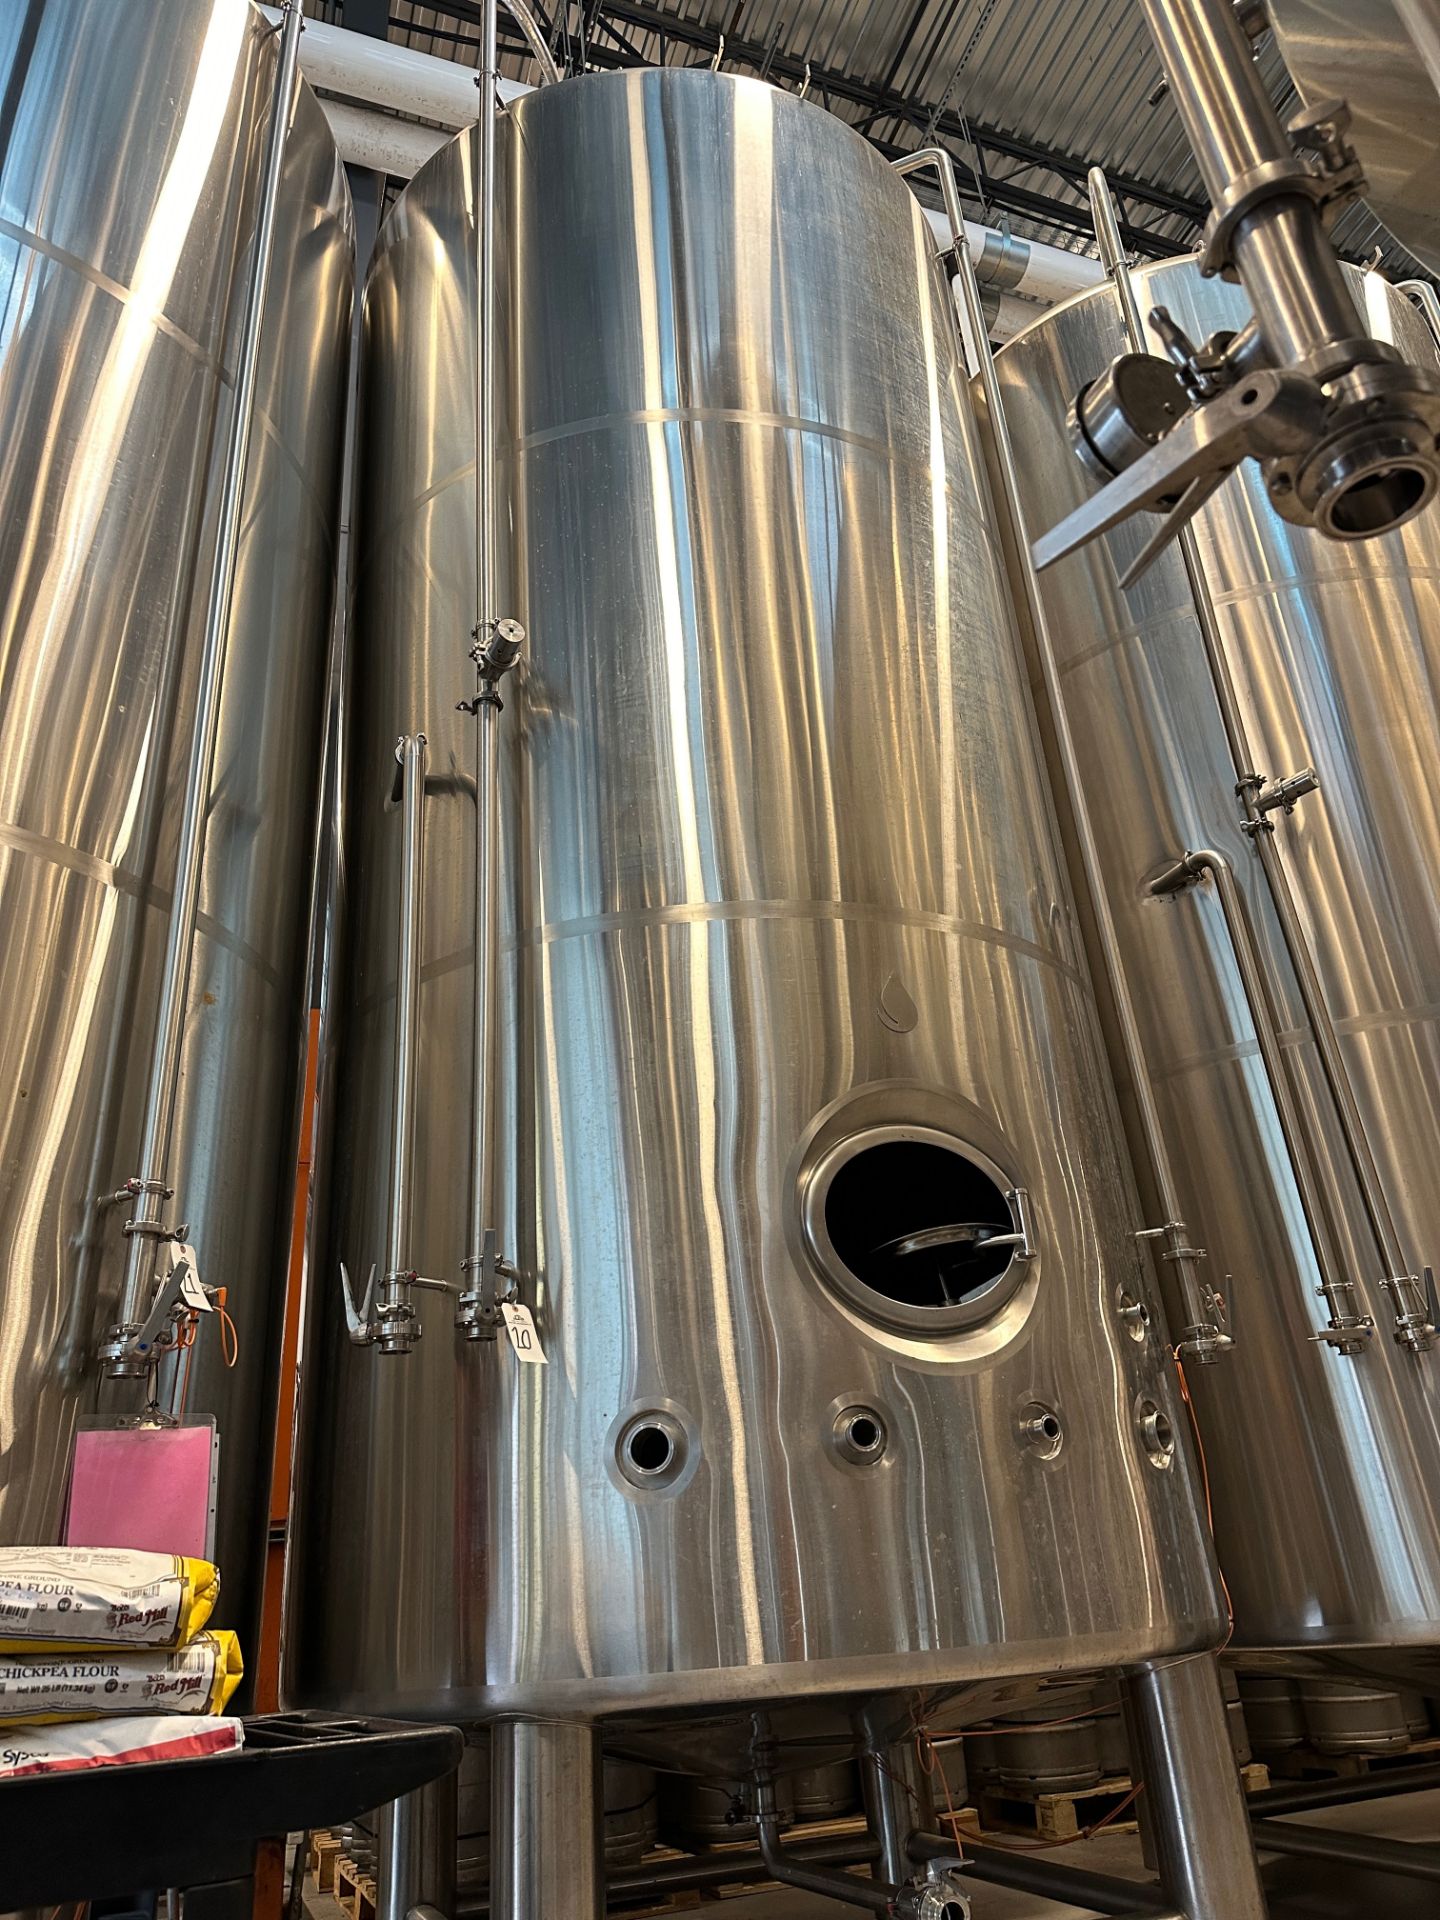 Complete 40 BBL Microbrewery - 40 BBL Deutsche 4-Vessel Brewhouse, Tanks, Can Line - See Description - Image 43 of 335